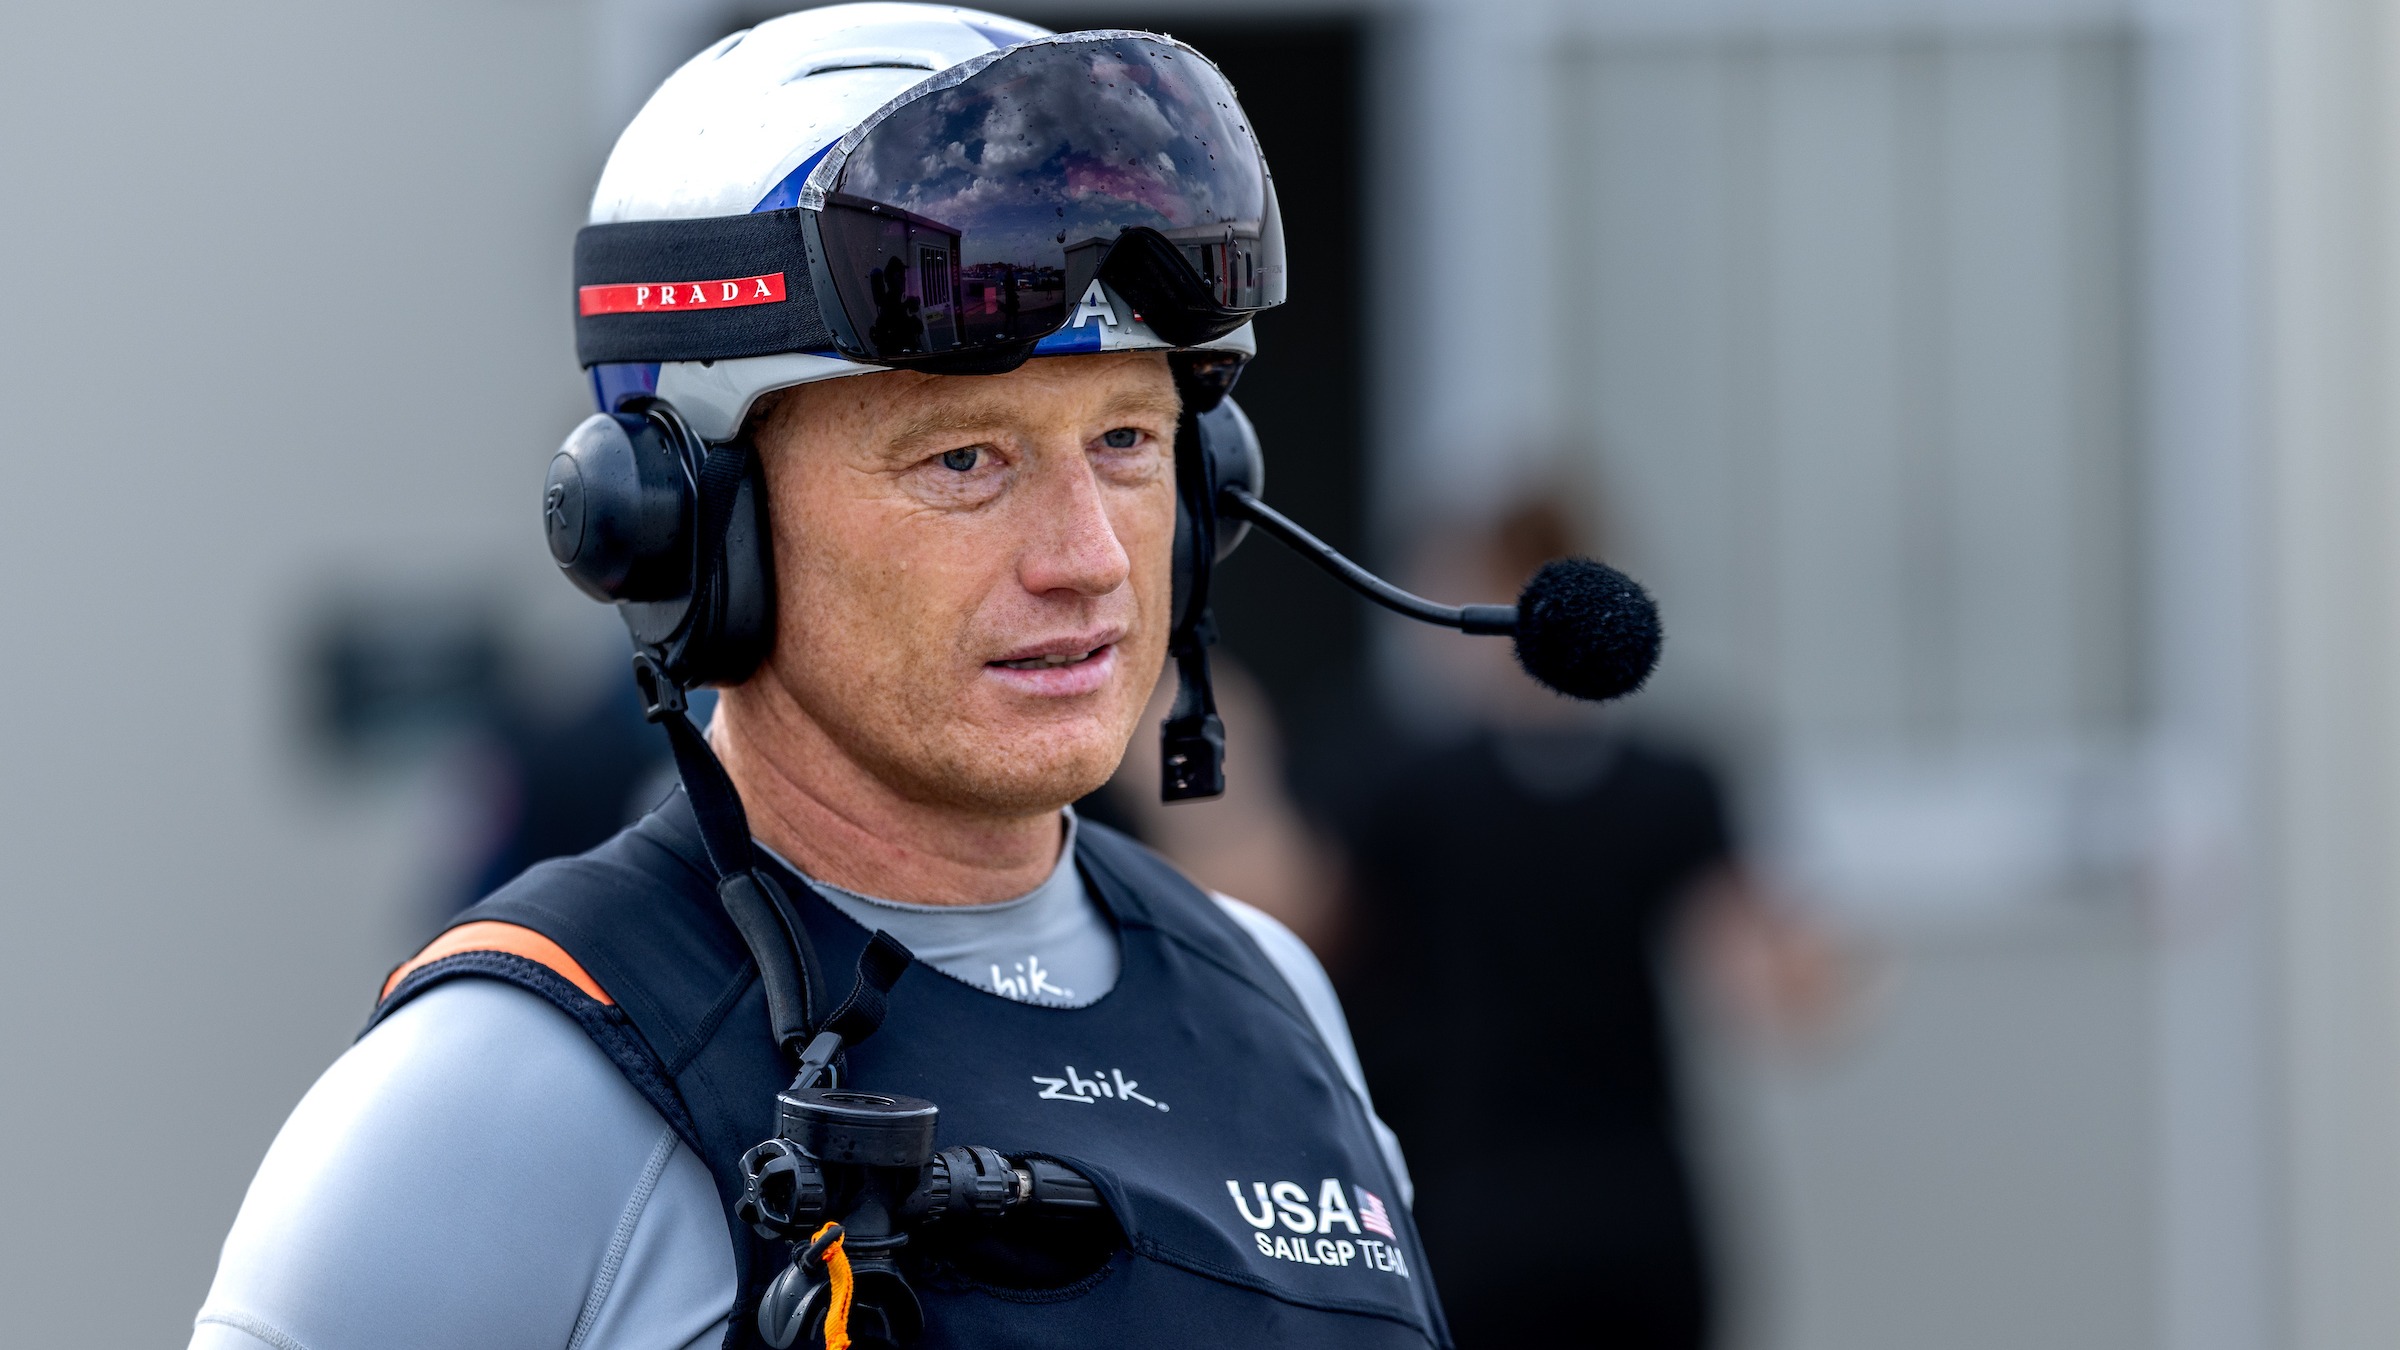 Season 4 // United States driver Jimmy Spithill on day 1 of Taranto racing 